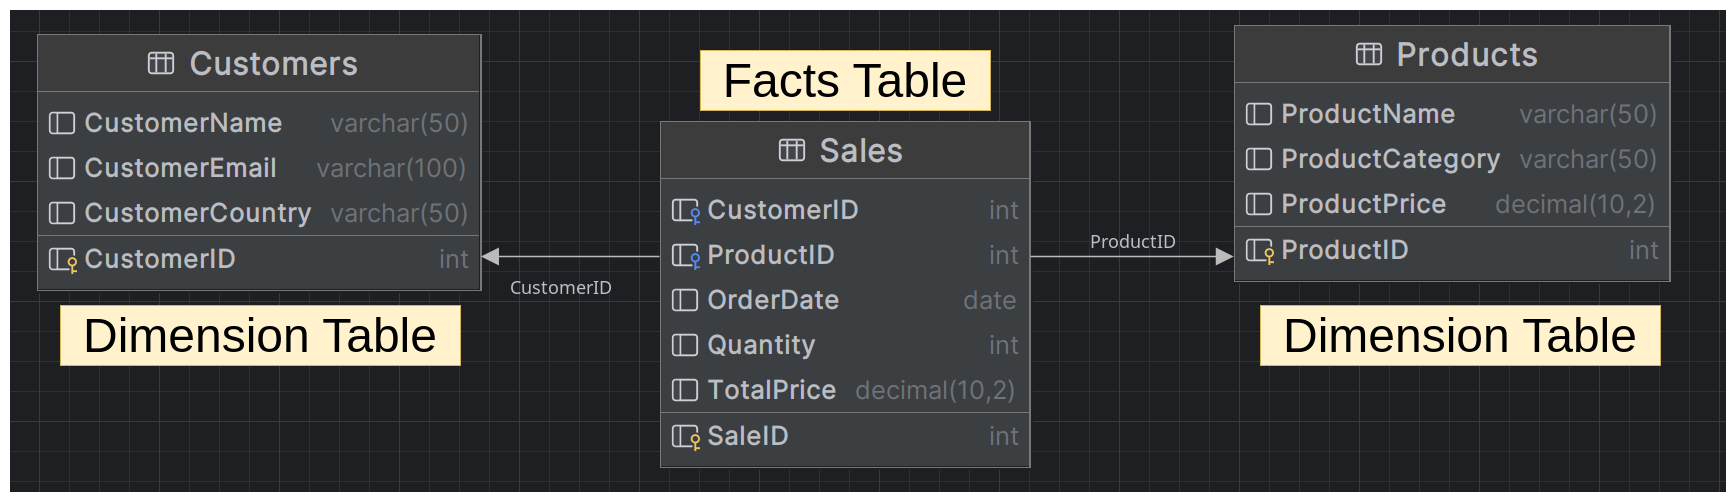 Fact and Dimension Tables